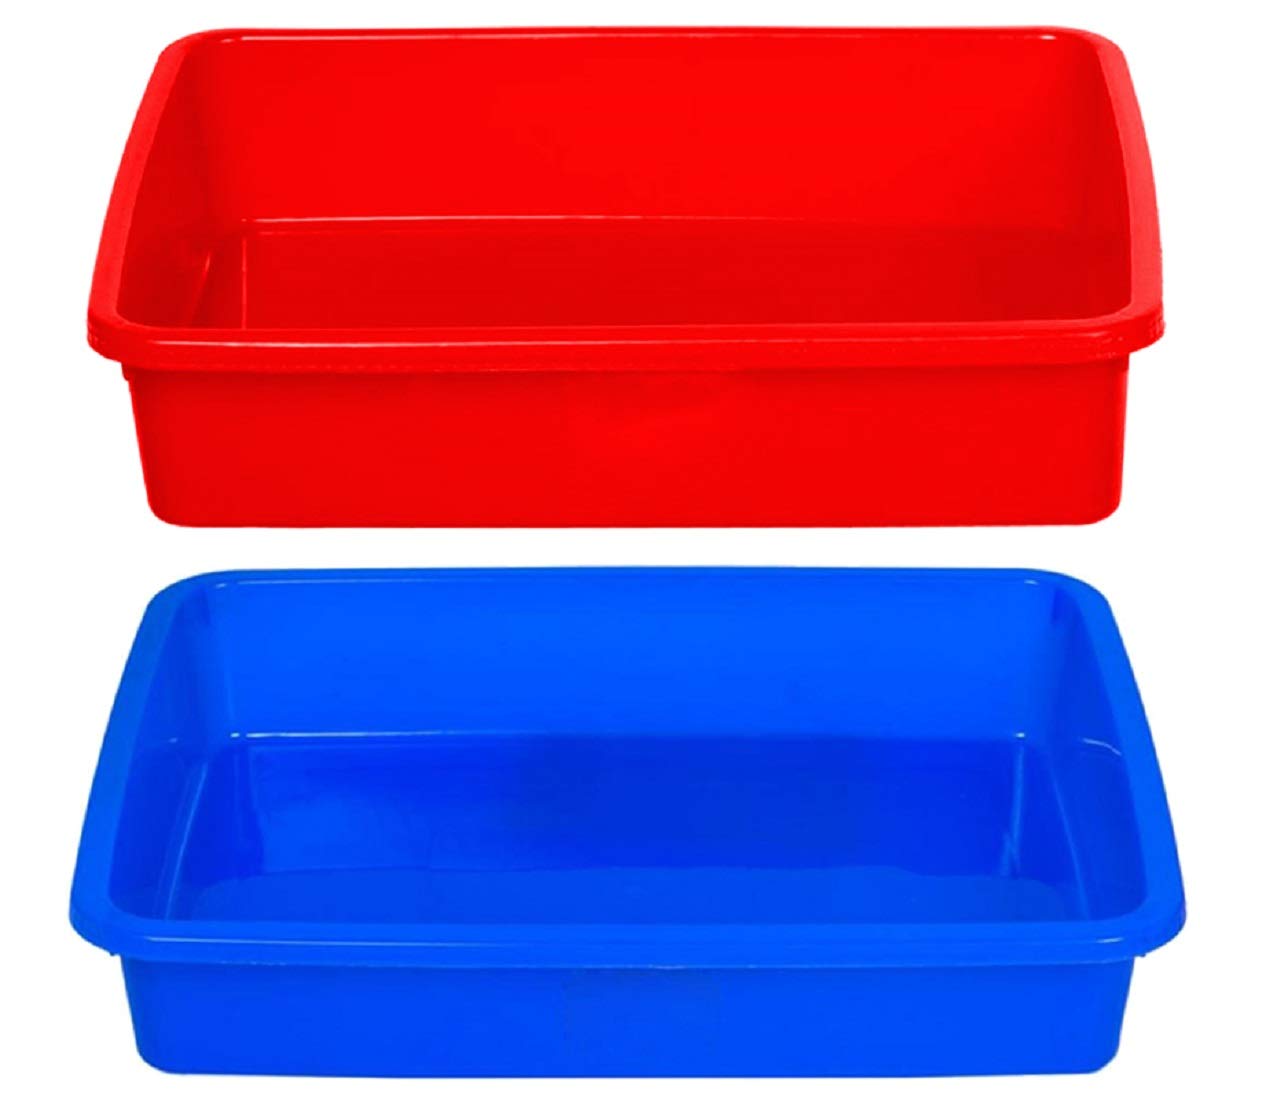 Kuber Industries Plastic 2 Pieces Small Size Stationary Office Tray, File Tray, Document Tray, Paper Tray A4 Documents/Papers/Letters/folders Holder Desk Organizer (Blue & Red) CTKTC134824